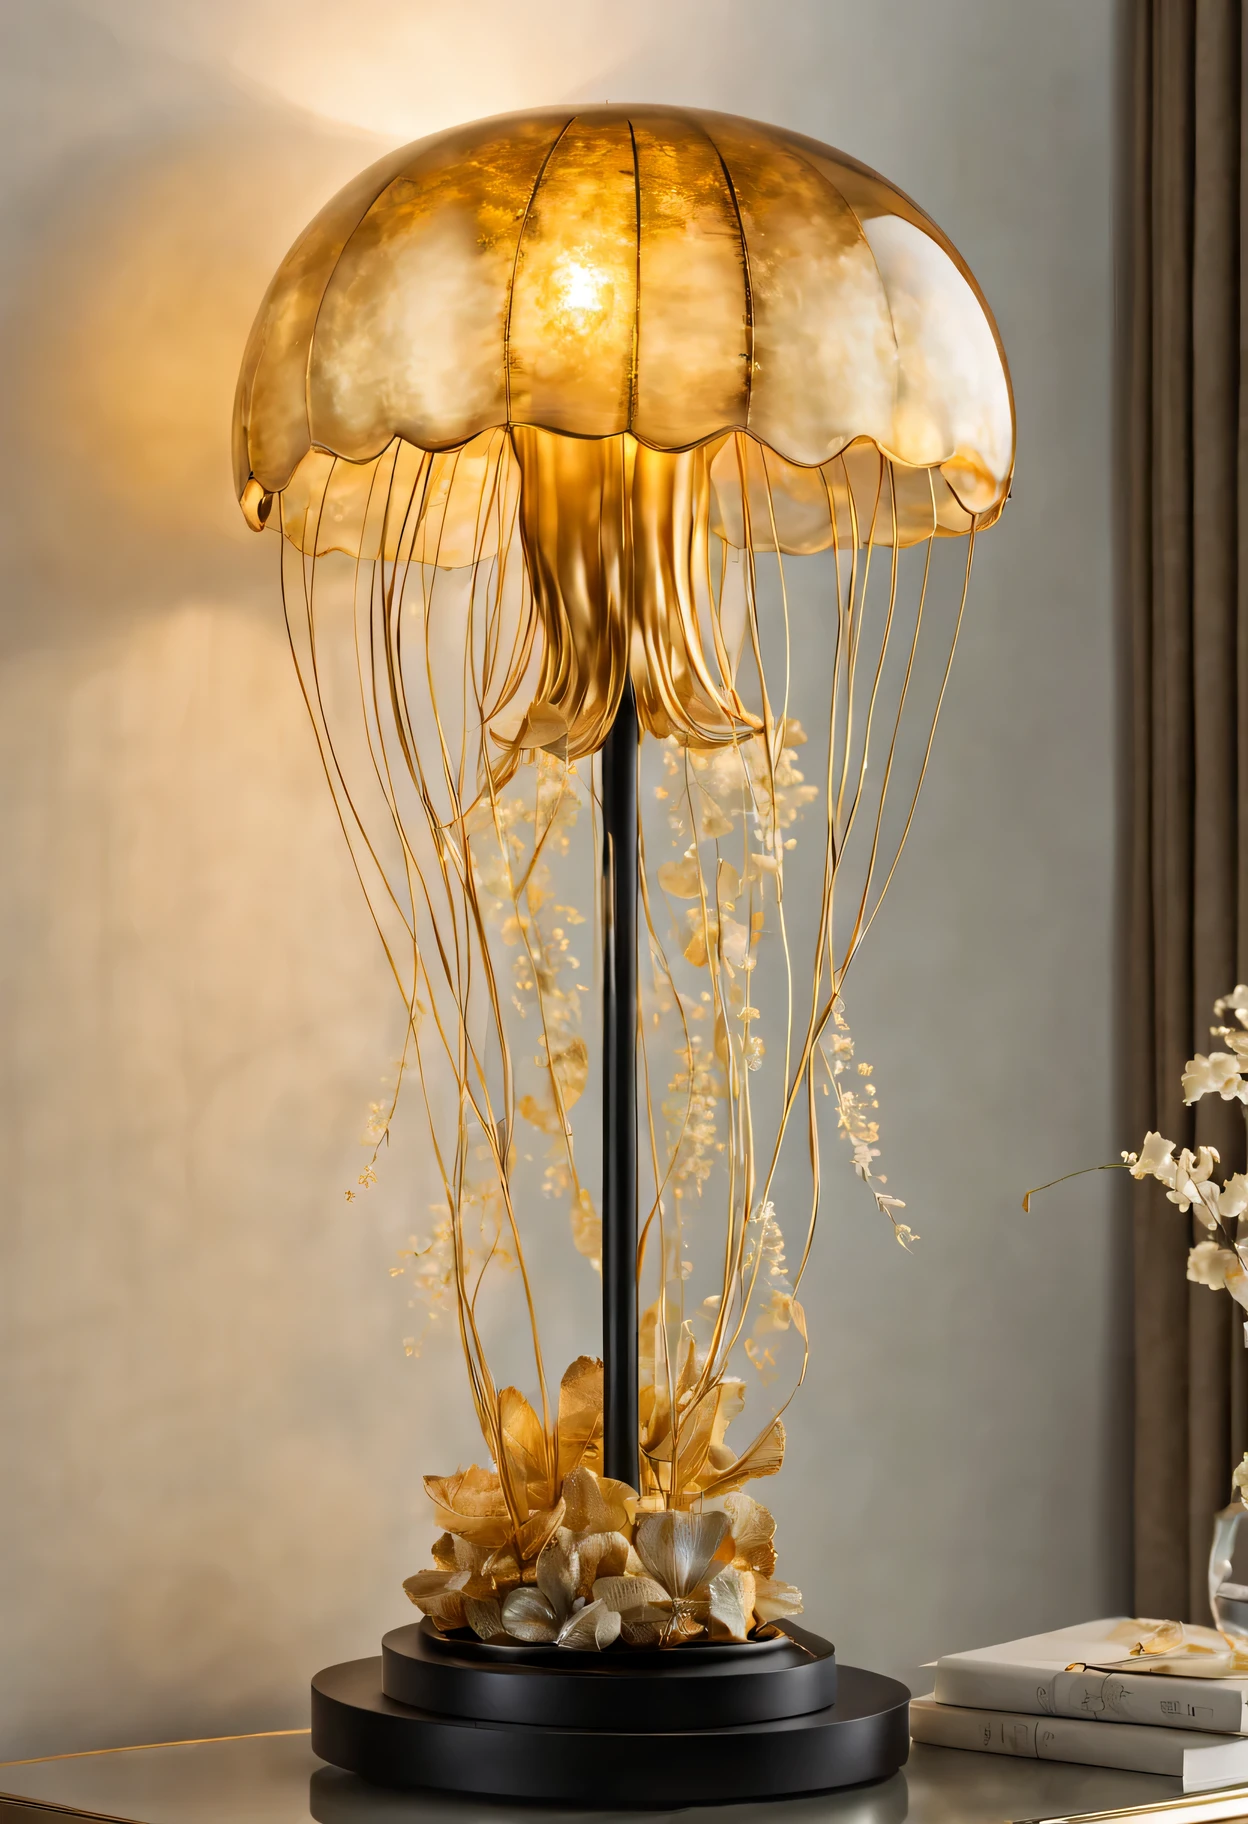 Glowing golden jellyfish table lamp in dark room,Sparkling gold sculpture,Meticulous tentacles,Exquisite body,Dazzling metallic luster,Subtle iridescent glow,Realistic textures and shapes,Exquisite craftsmanship and intricate design,artistic expression of graceful movements,awesome existence,Elegantly suspended in mid-air,Golden tendrils swirl gracefully,bright colors blending seamlessly,Impressive size and scale,Create a sense of wonder and tranquility,breathtaking and unique masterpiece,(best quality,4k,8k,high resolution,masterpiece:1.2),Super detailed,(actual,photoactual,photo-actual:1.37),high dynamic range,ultra high definition,studio lighting,Ultra-fine painting,sharp focus,Physically based rendering,professional,bright colors,Bokeh,portrait,art sculpture.